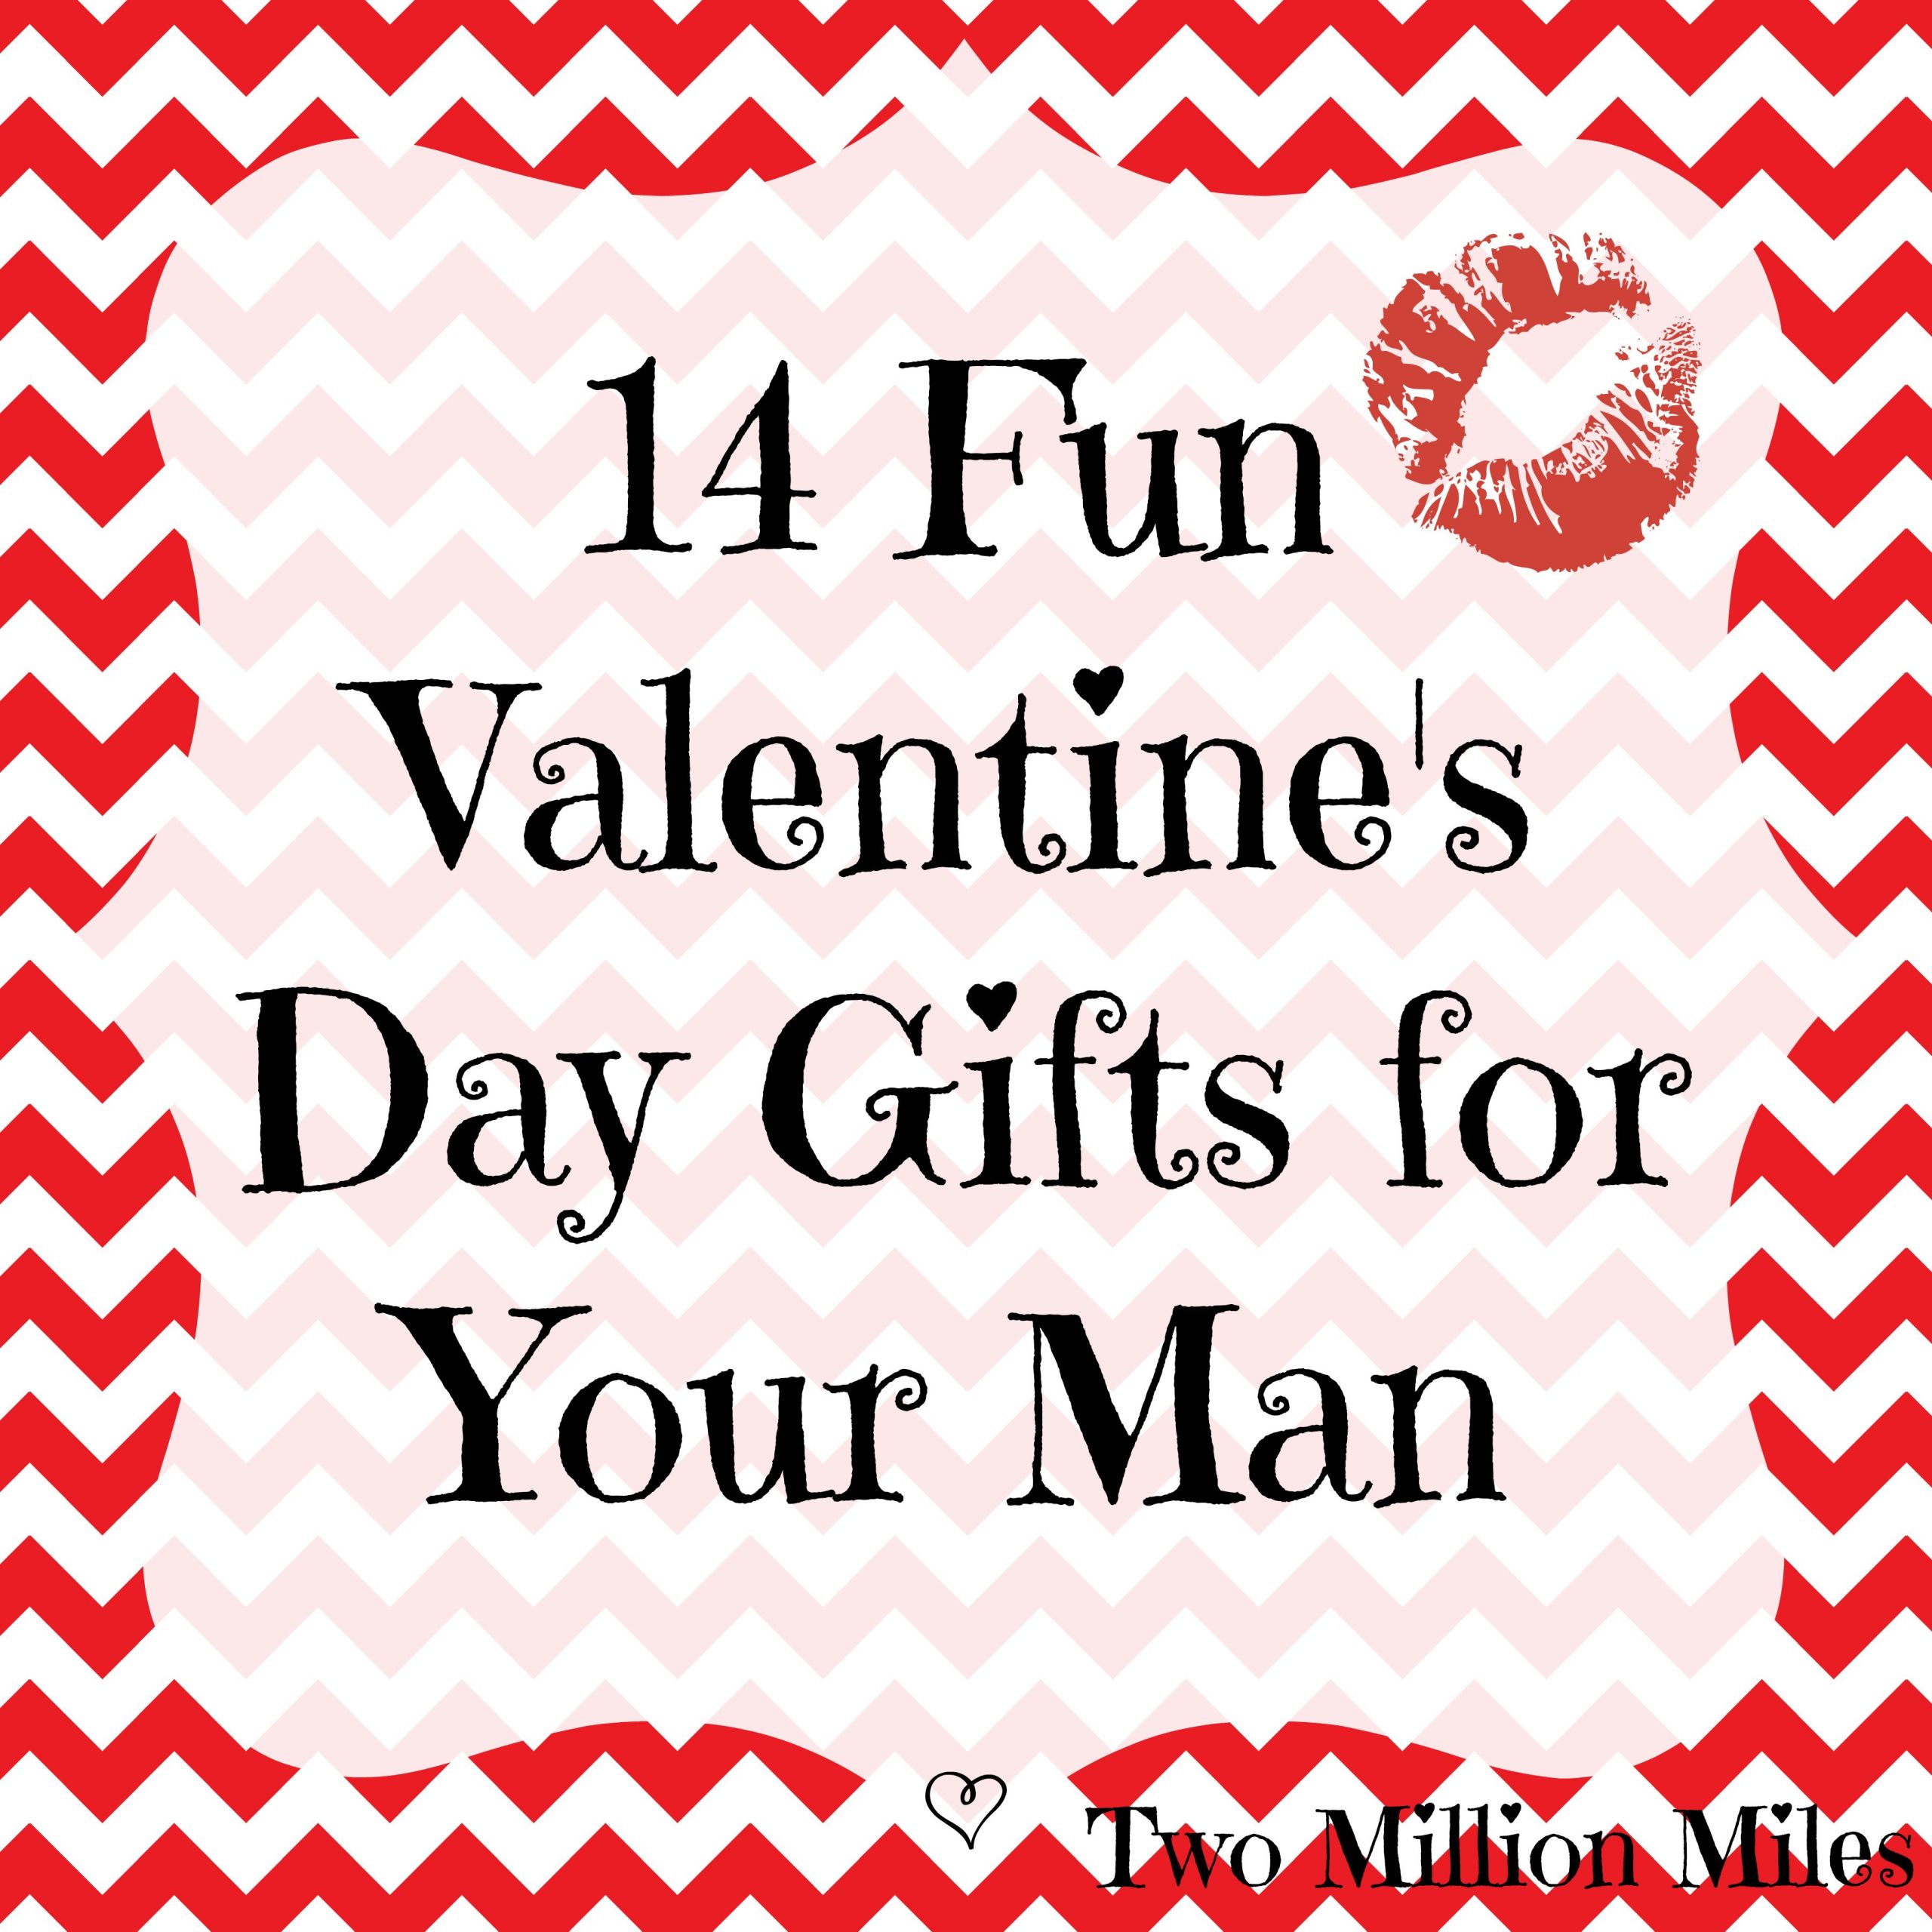 Valentines Day Gift Ideas For Men
 14 Valentine’s Day Gifts for Your Man